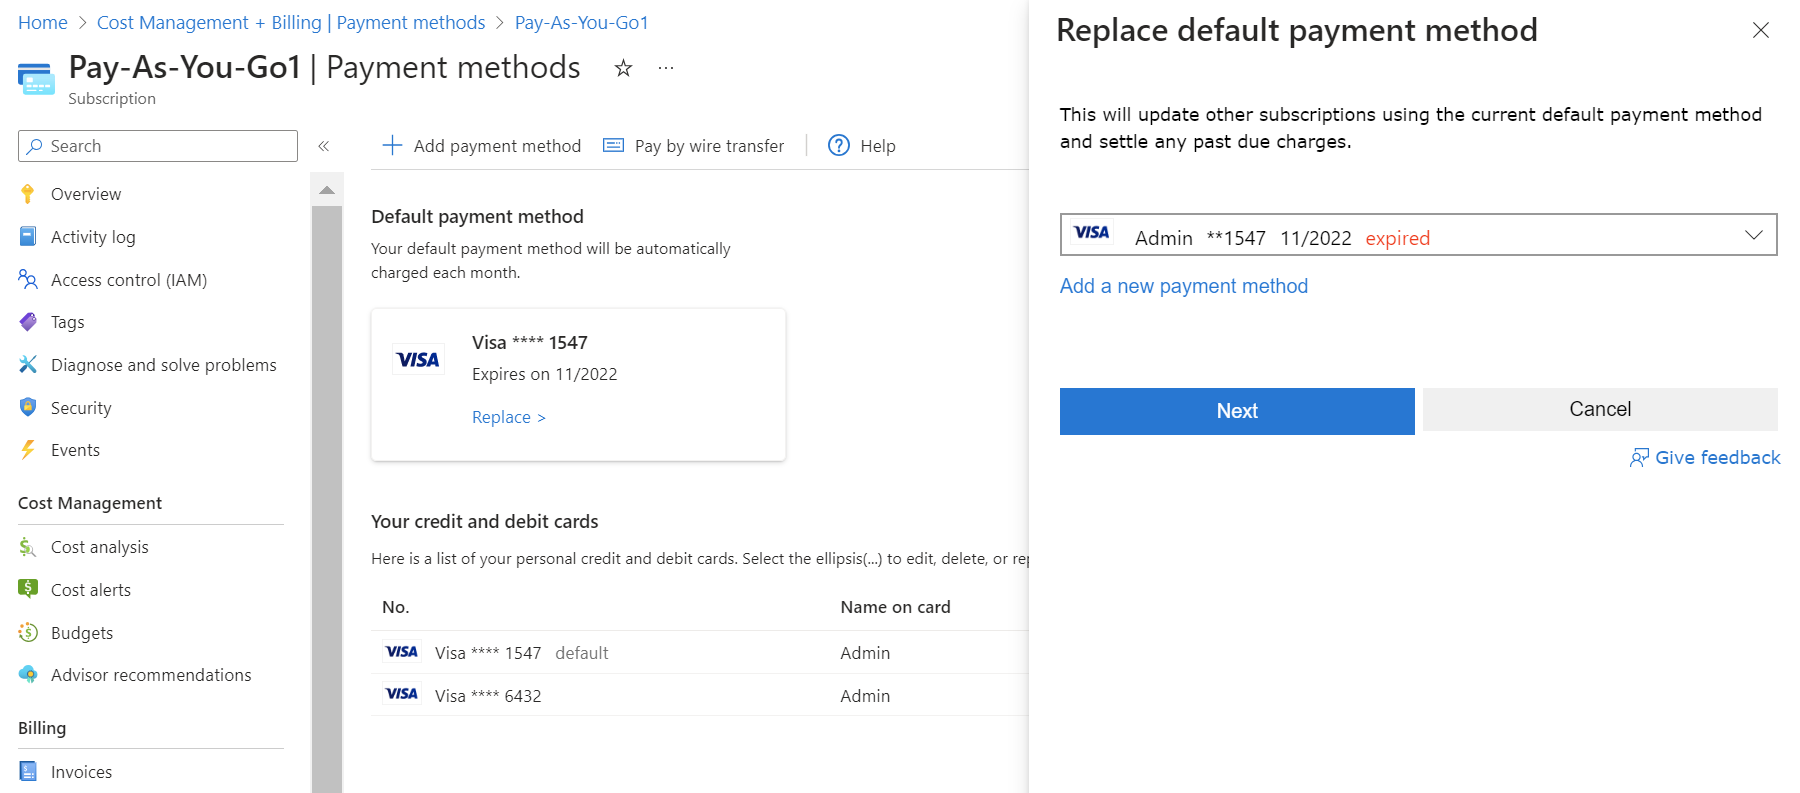 Screenshot showing the Replace default payment method box.